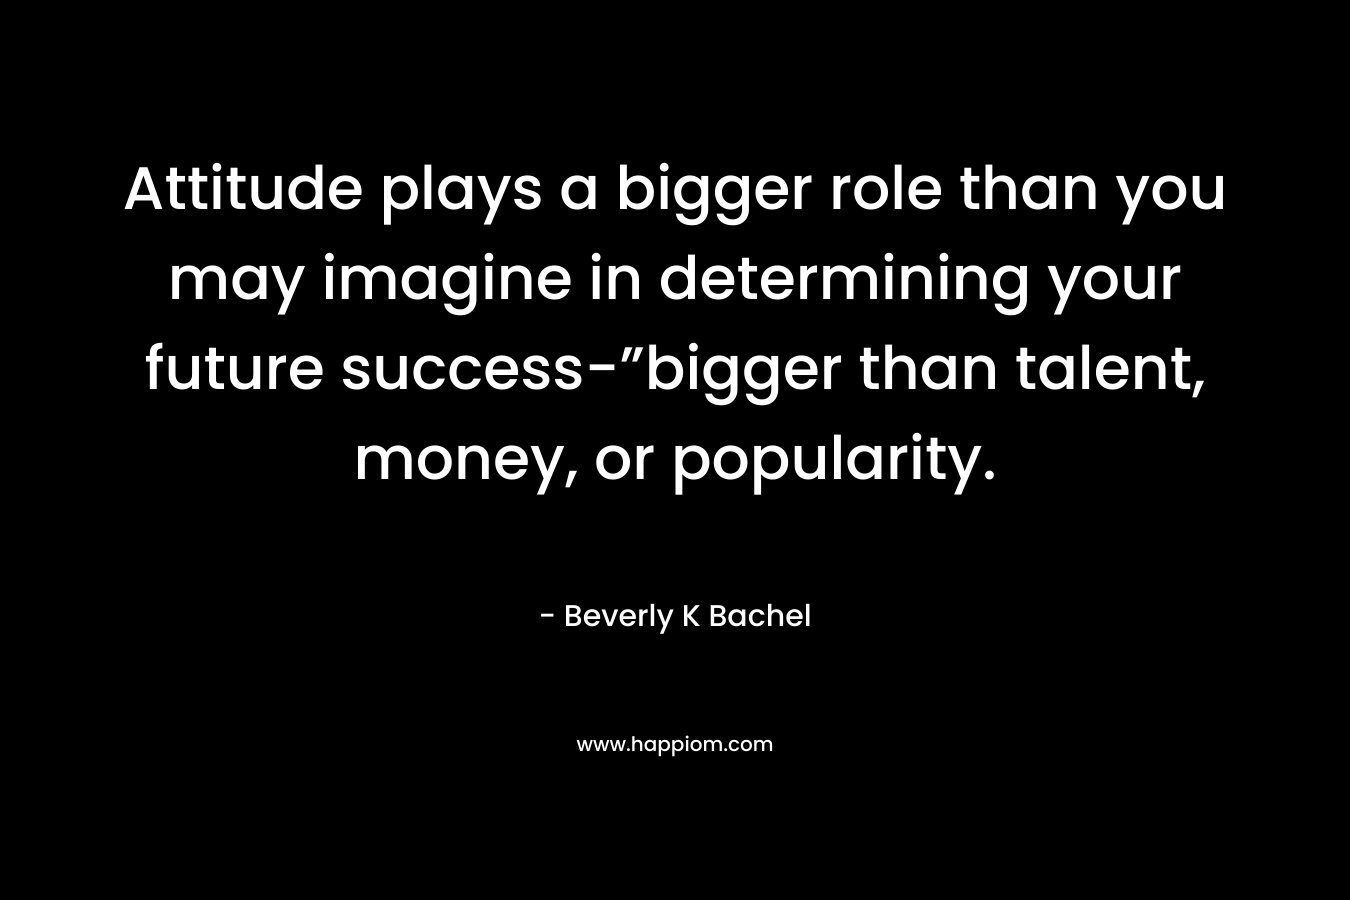 Attitude plays a bigger role than you may imagine in determining your future success-”bigger than talent, money, or popularity.